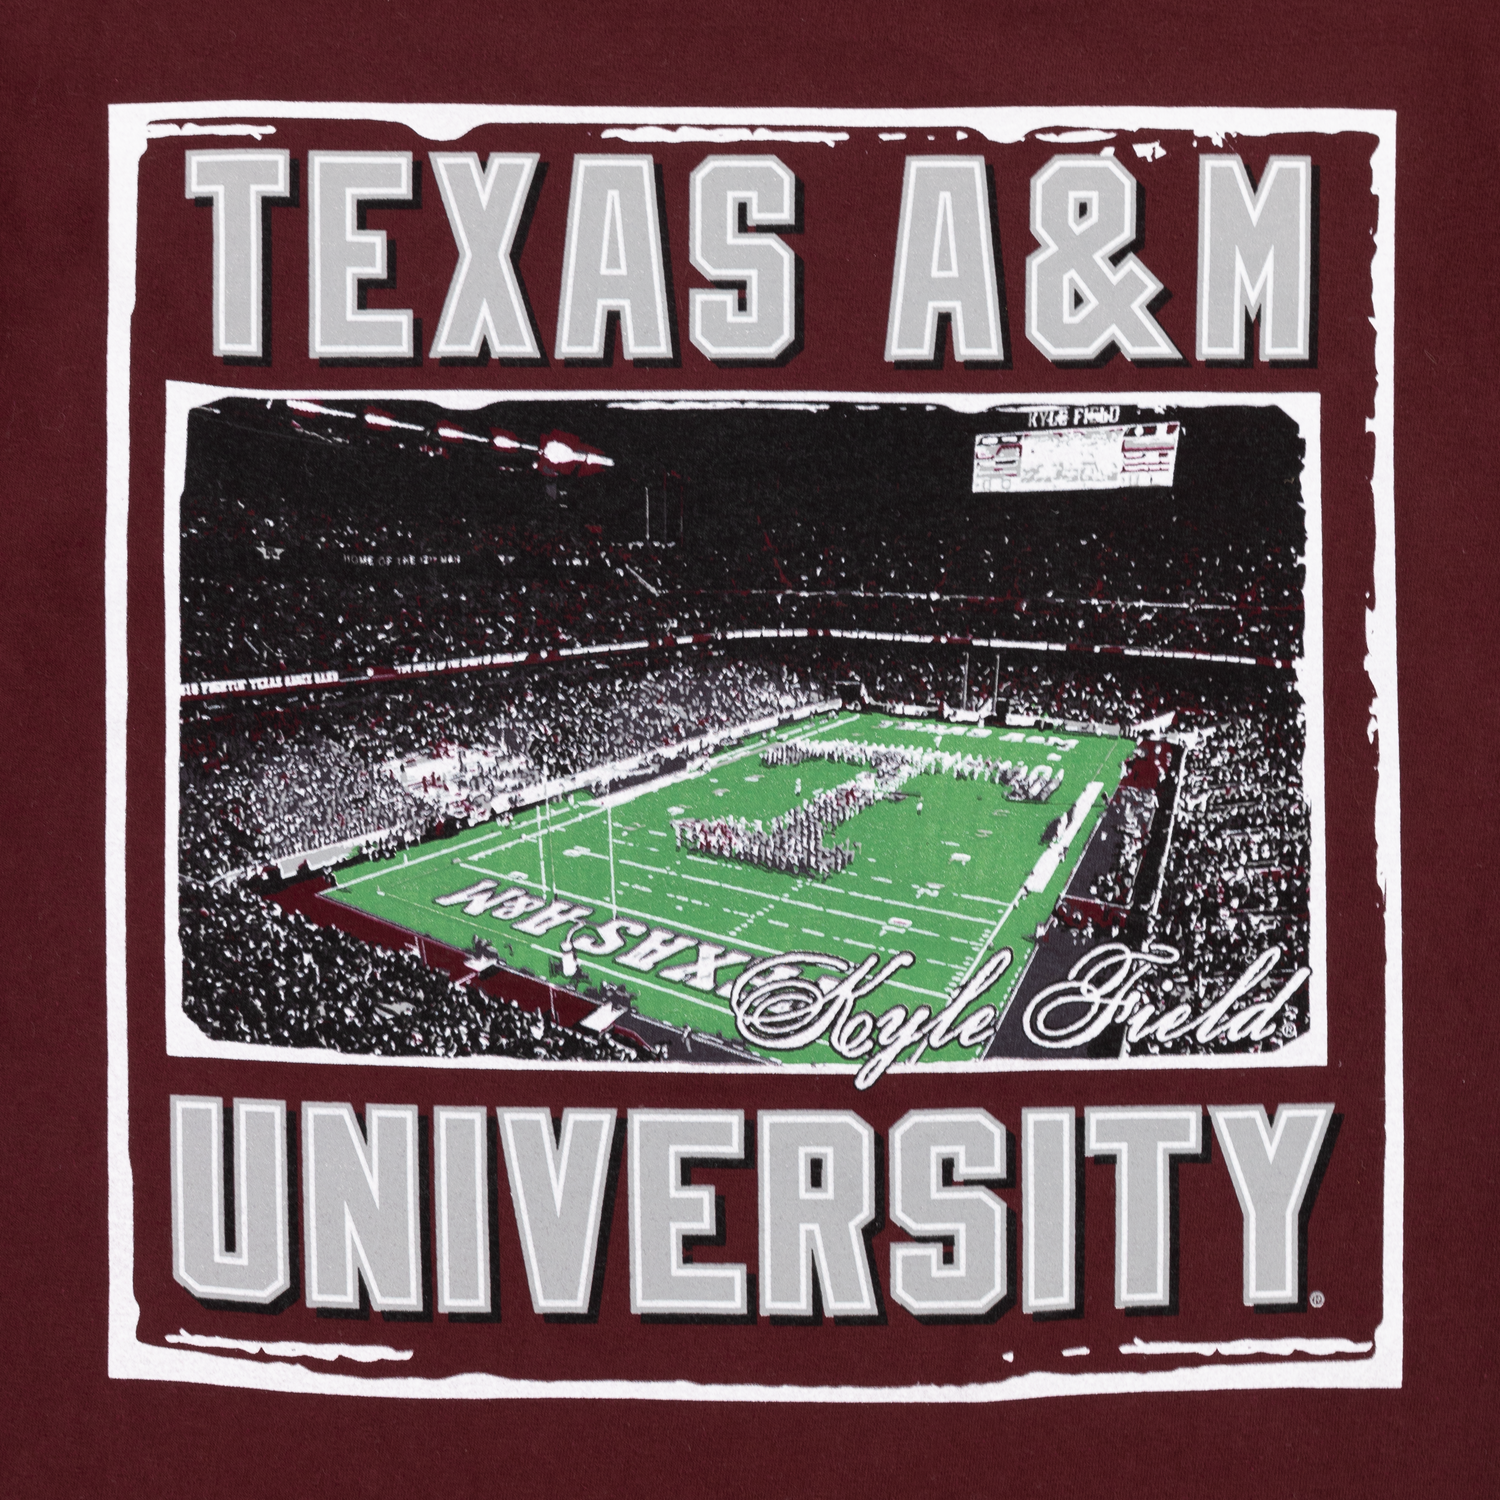 Texas A&M University SEC Kyle Field Fly Over Maroon T-Shirt